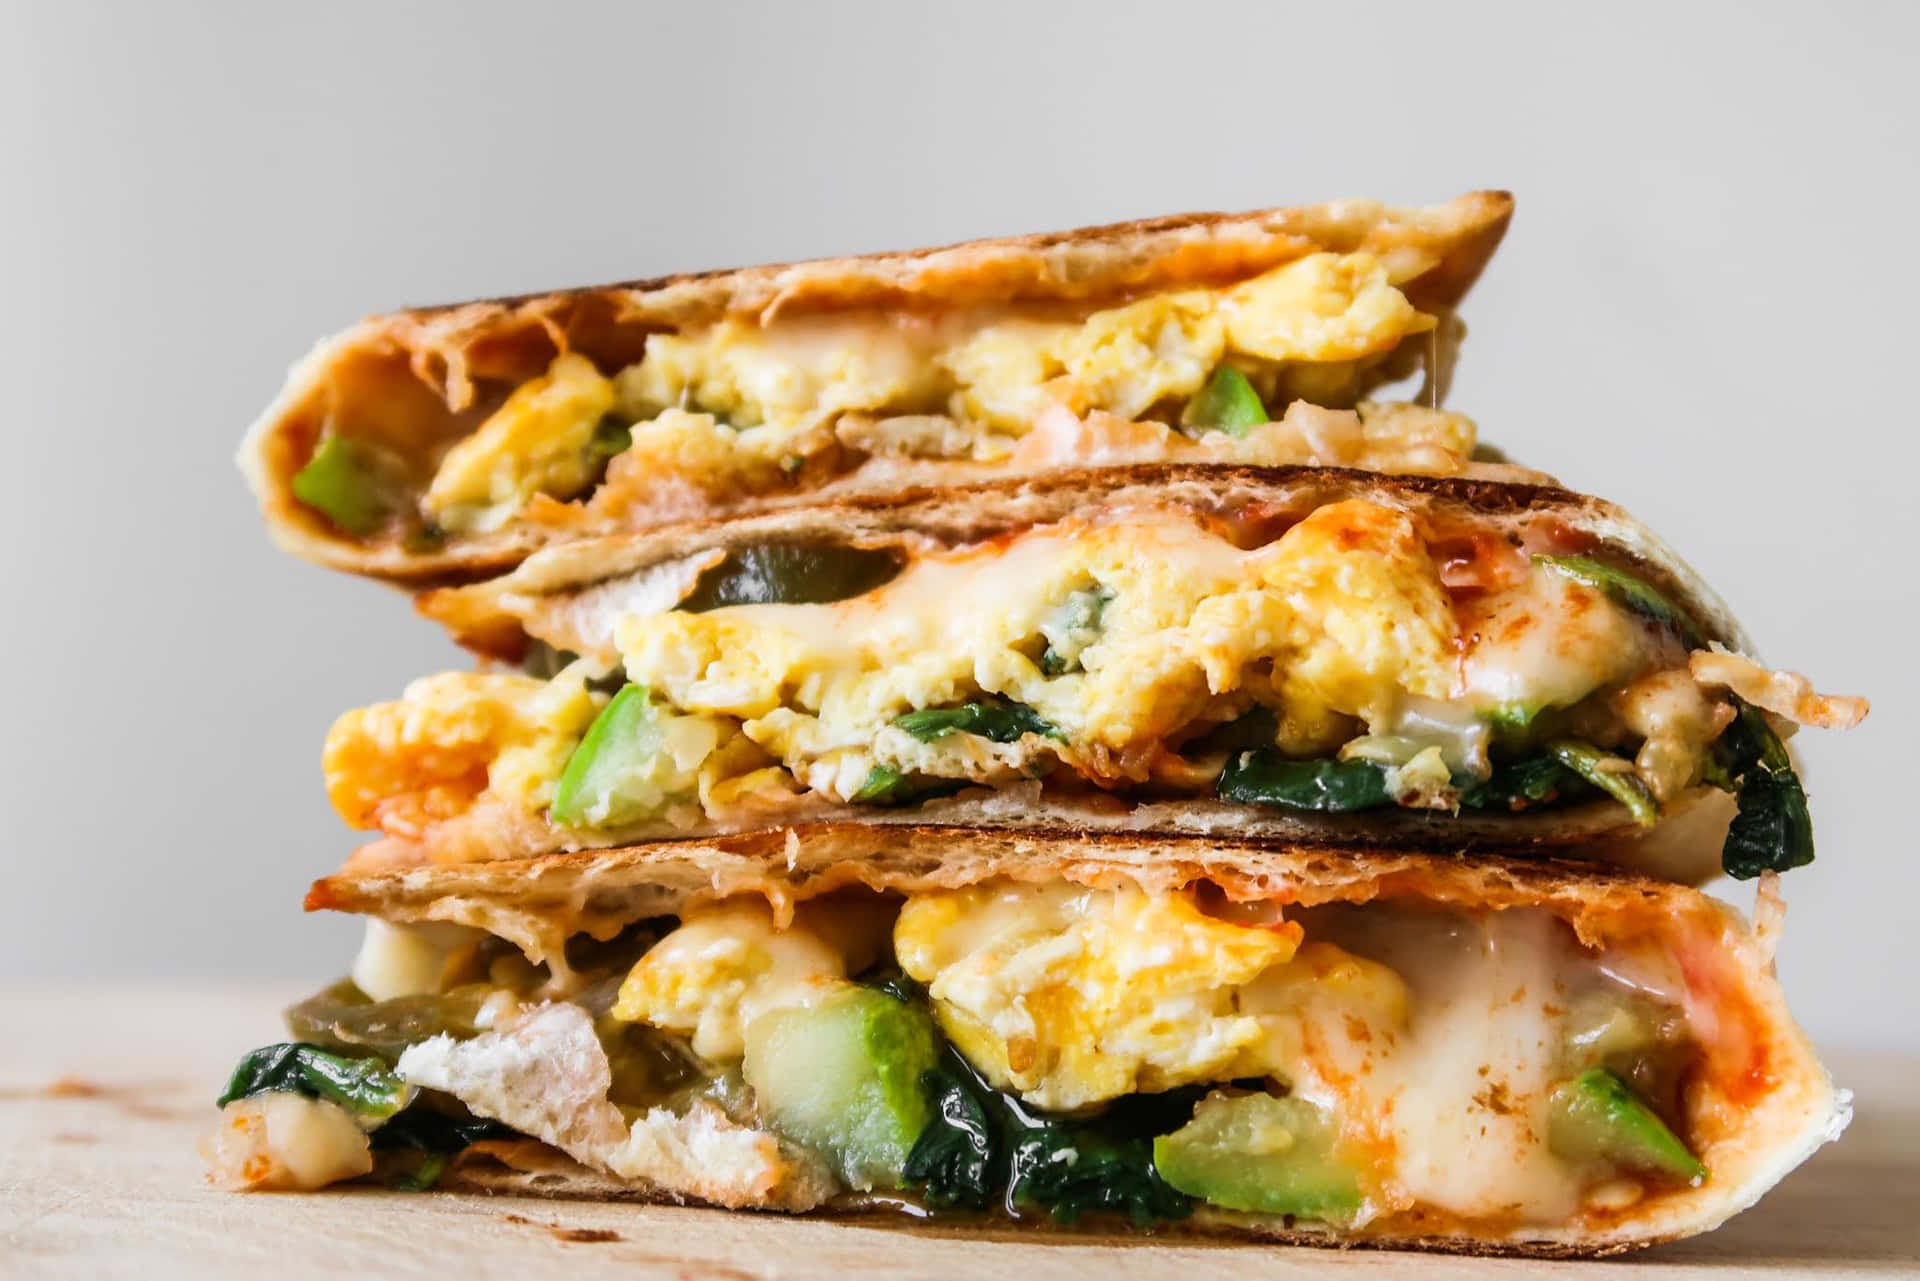 A Stack Of Grilled Sandwiches With Spinach And Eggs